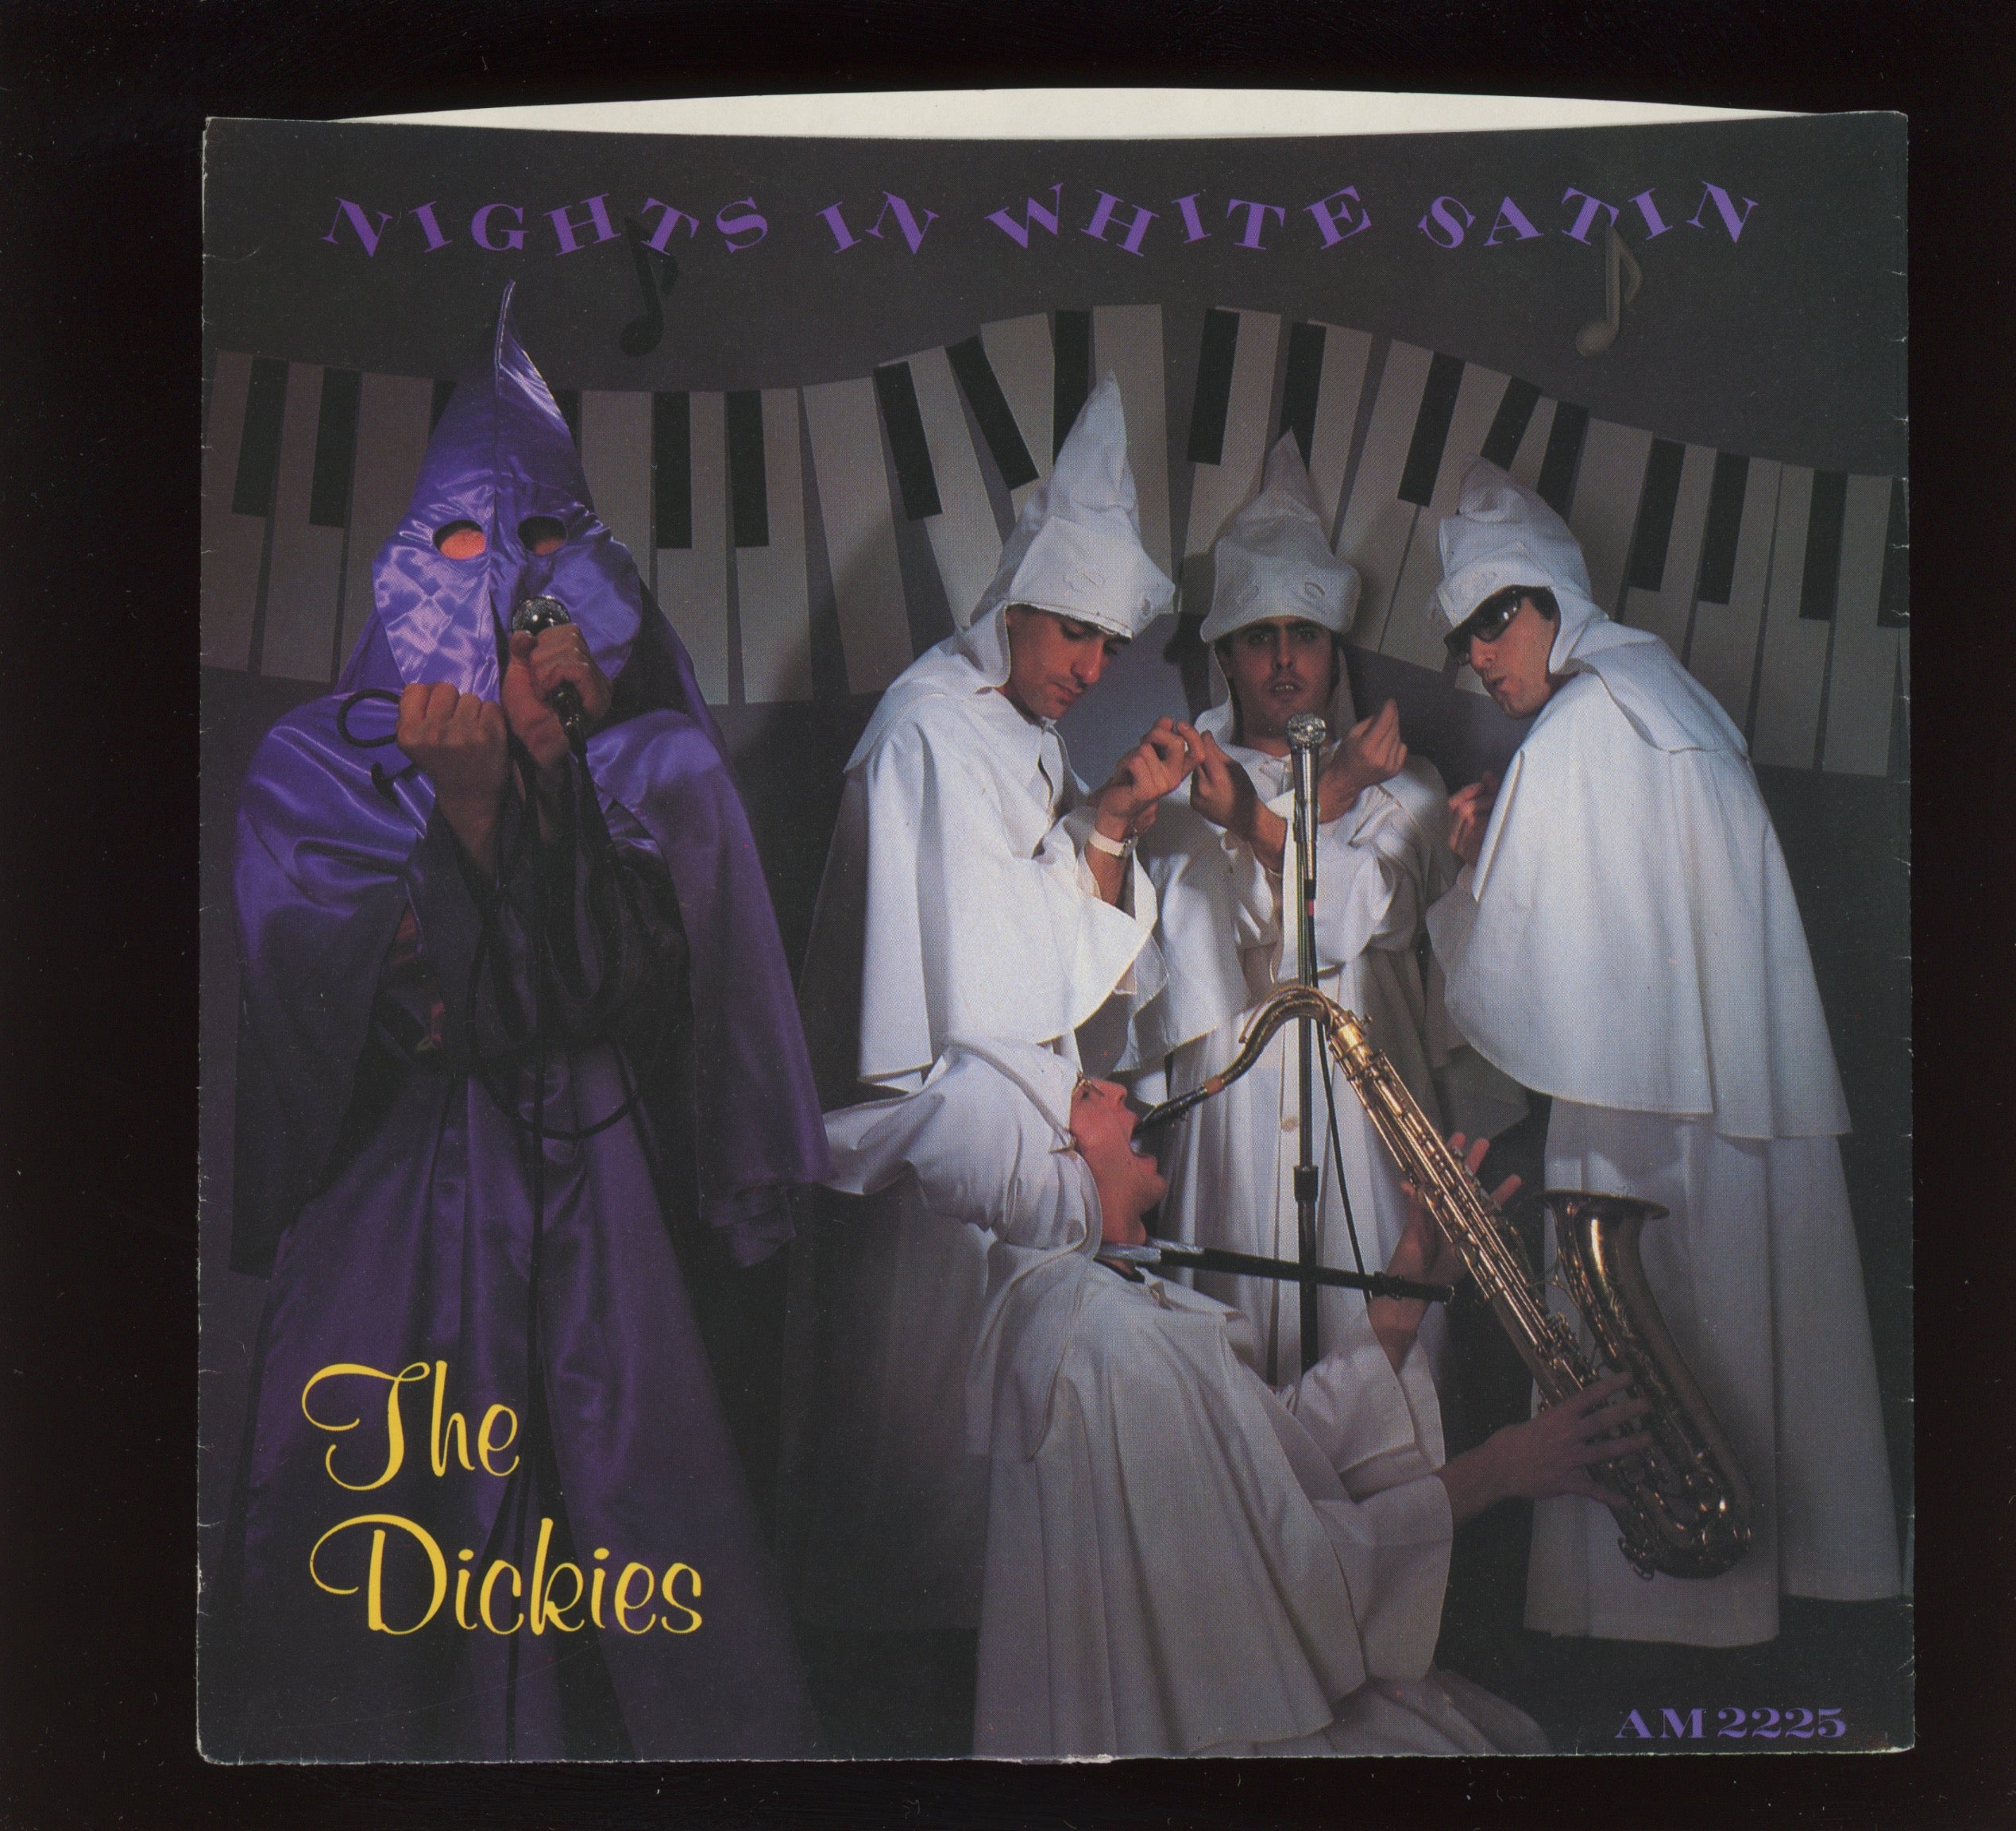 The Dickies - Nights In White Satin on A&M With KKK Picture Sleeve